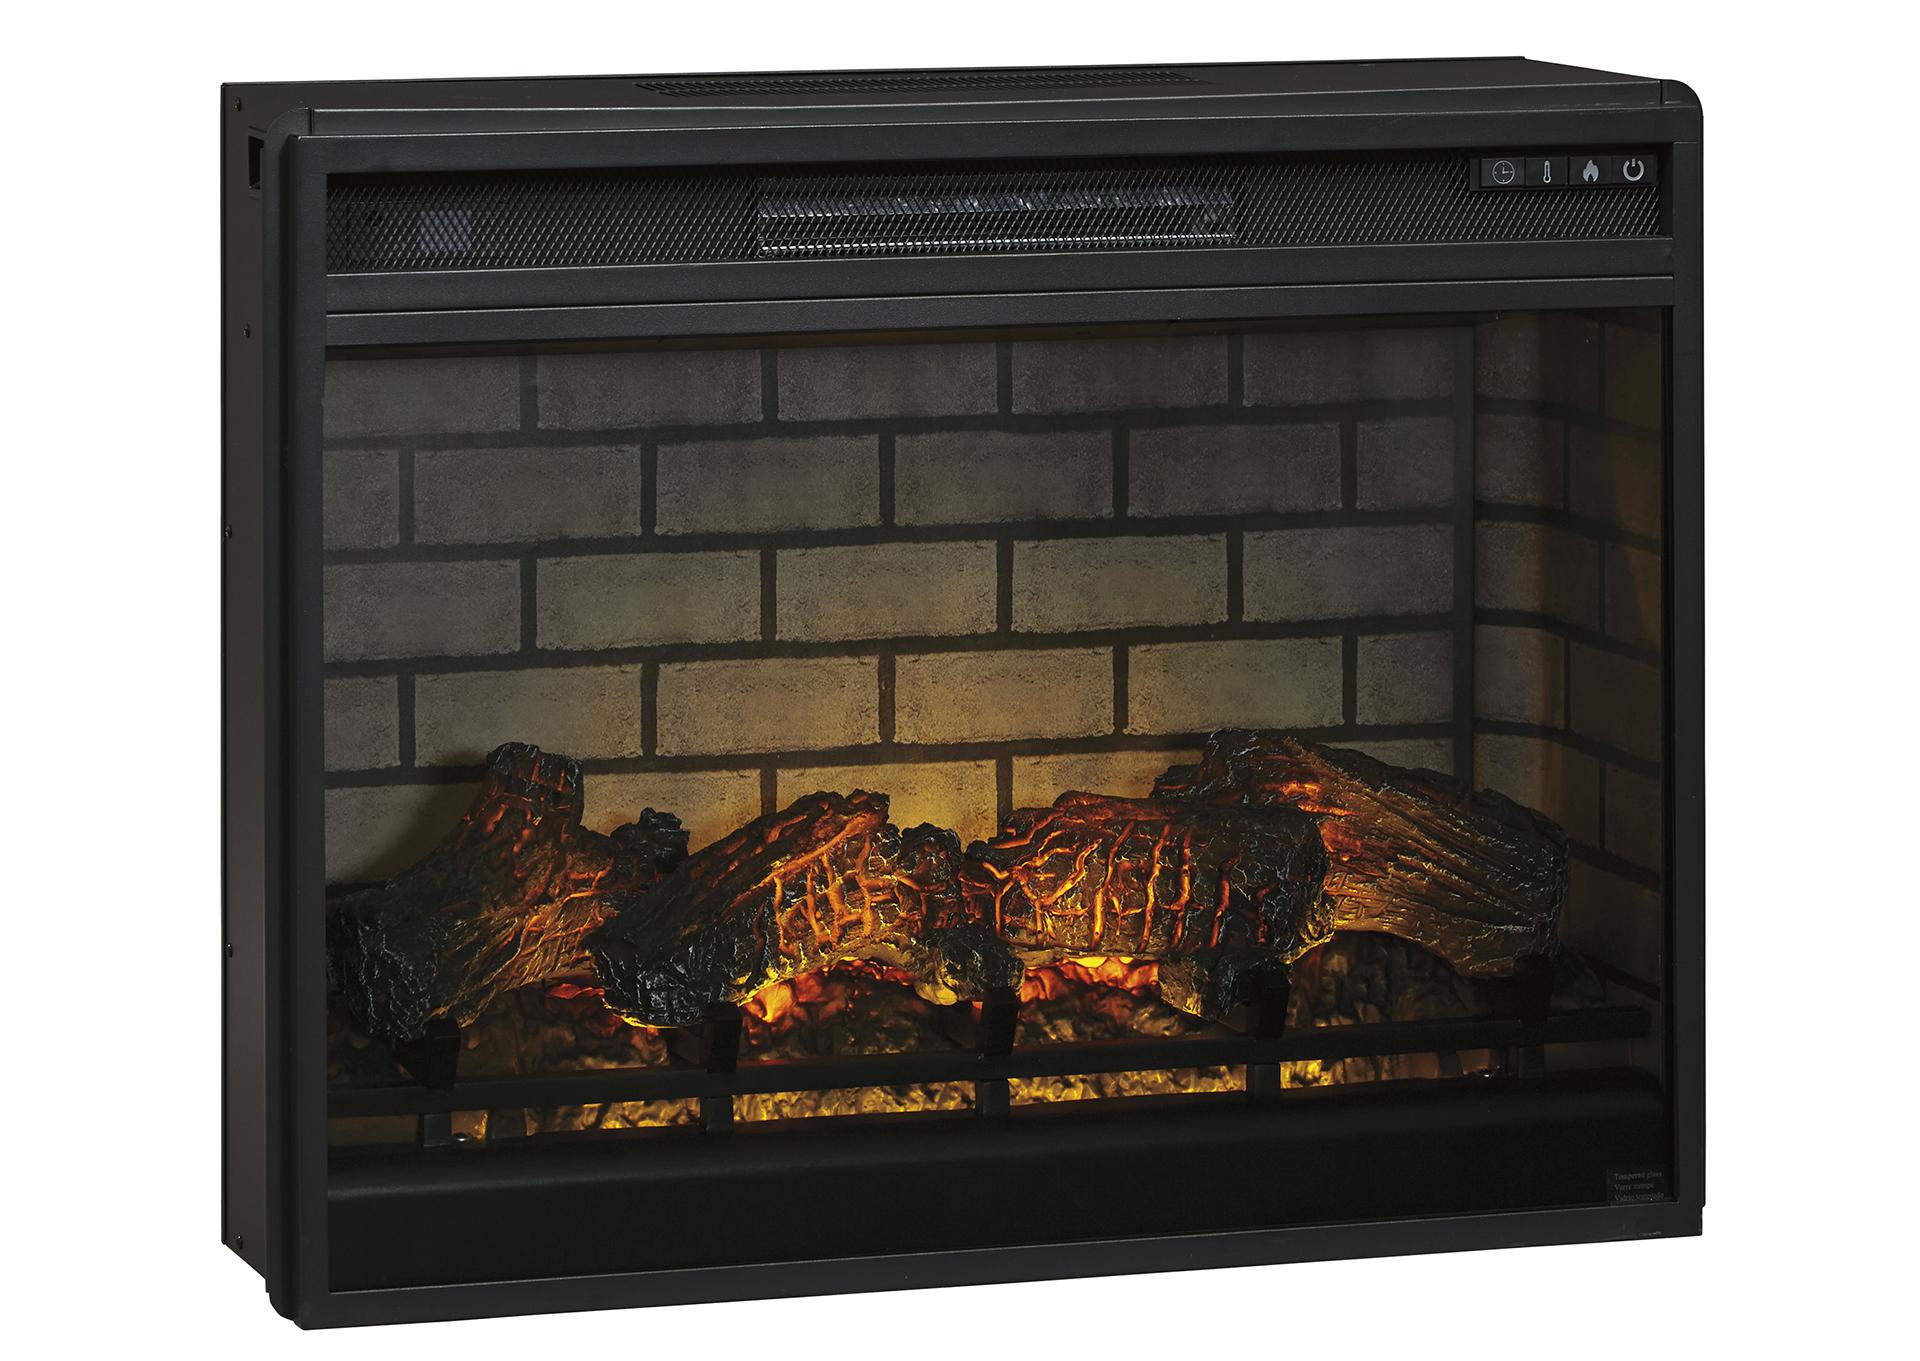 ENTERTAINMENT ACCESSORIES LARGE FIREPLACE INSERT INFRARED,ASHLEY FURNITURE INC.